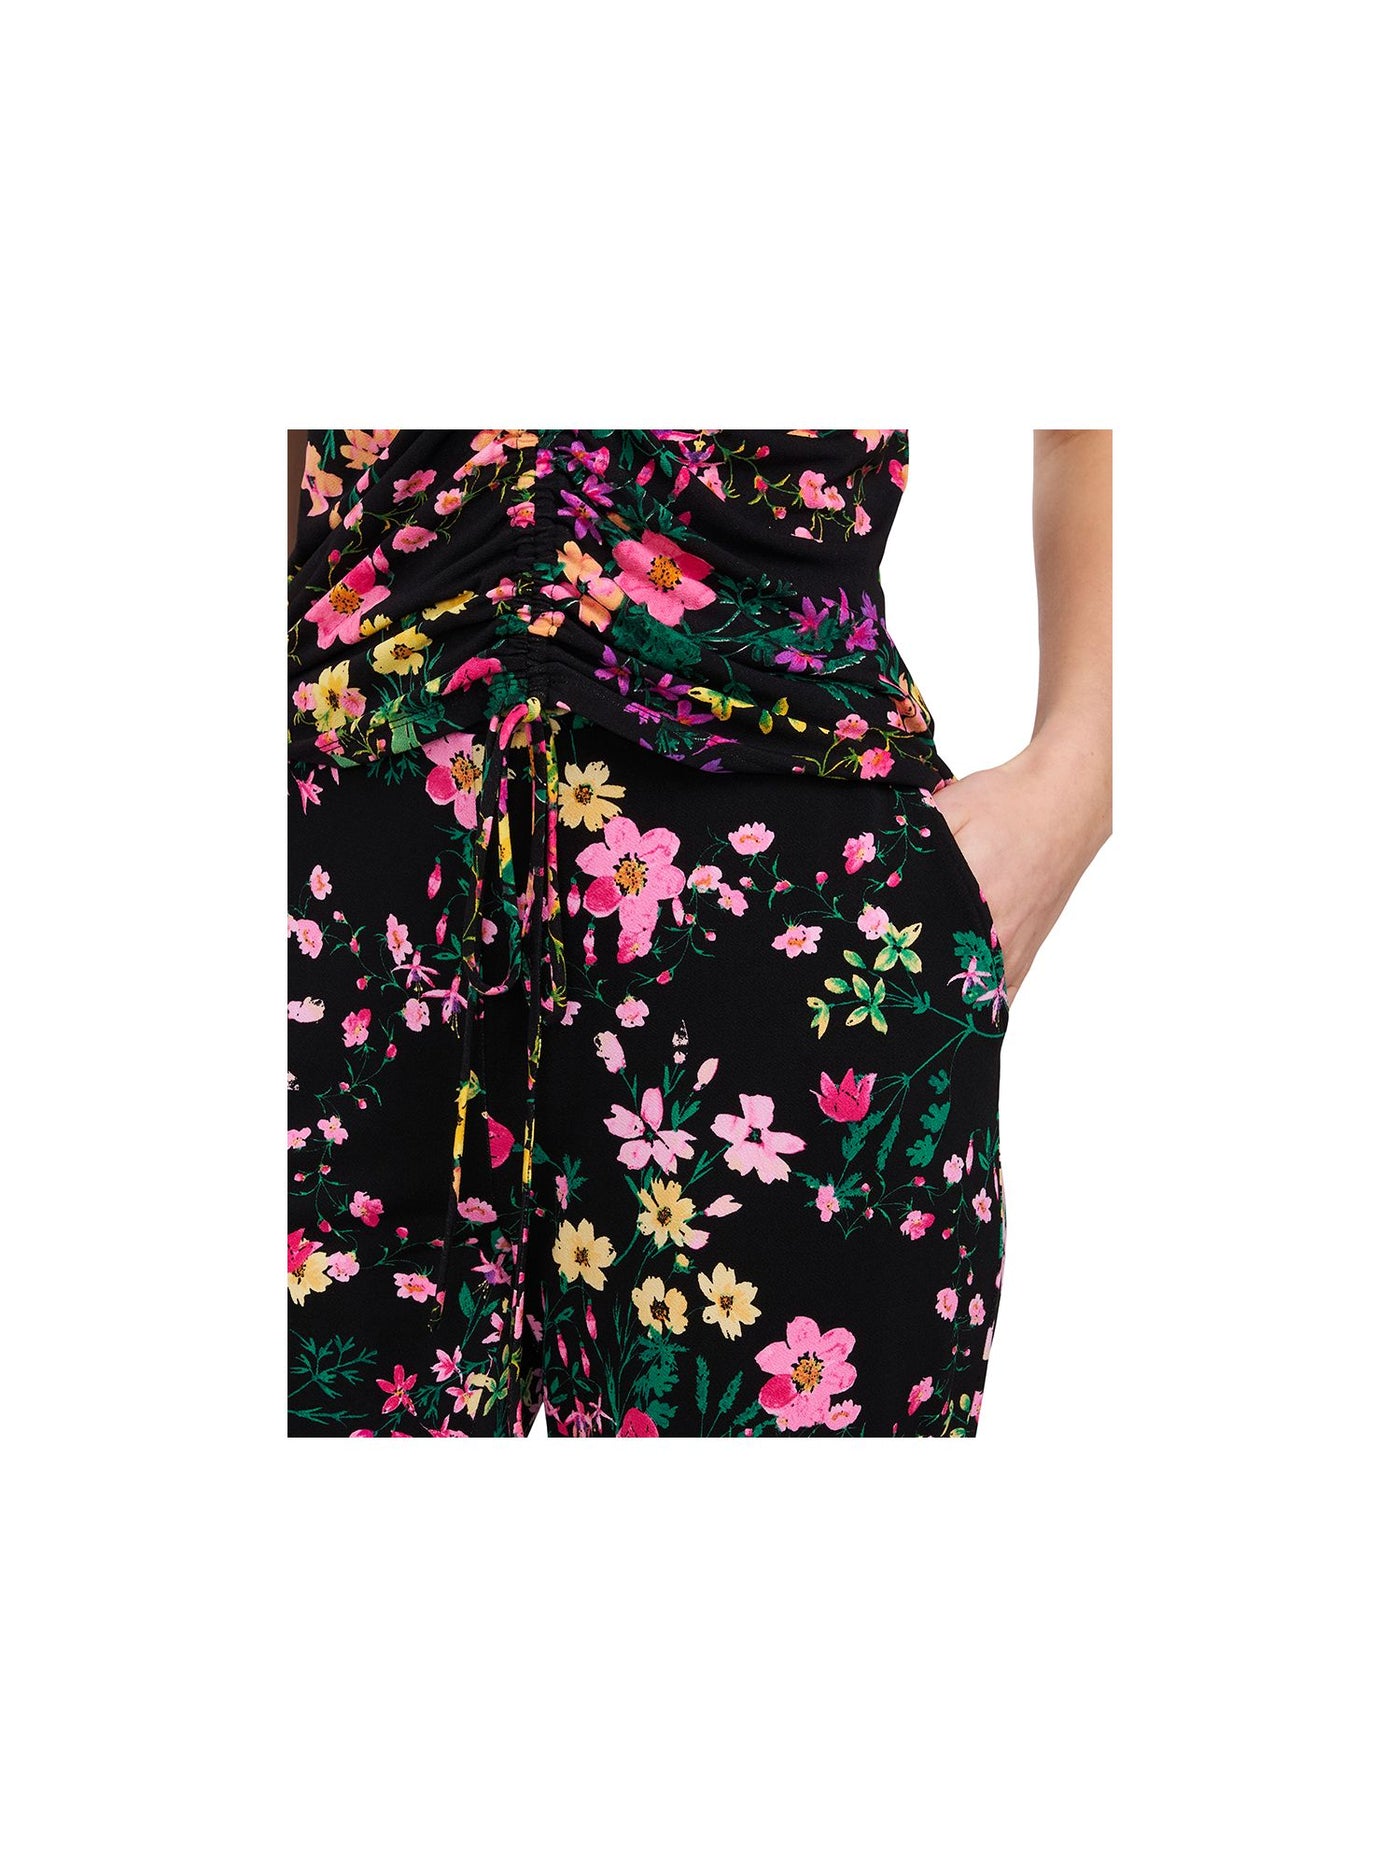 RILEY&RAE Womens Black Stretch Pocketed Elastic Waist Pull On Style Floral Cuffed Pants XS